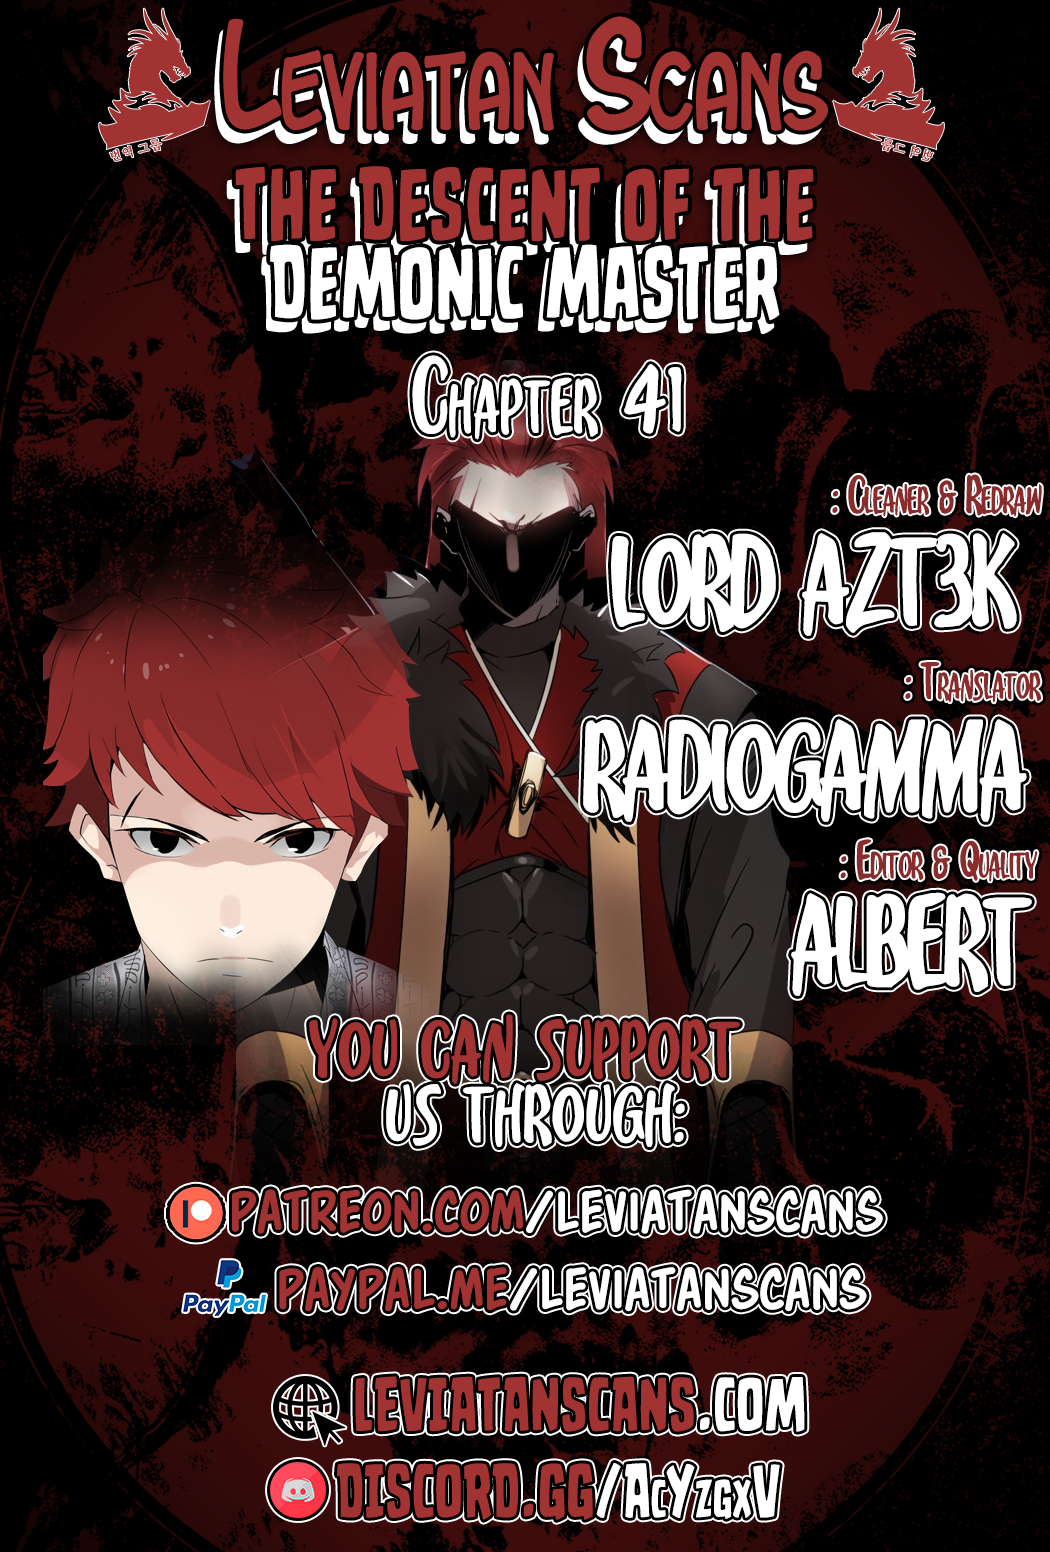 The Descent of the Demonic Master - Chapter 302 - Image 1